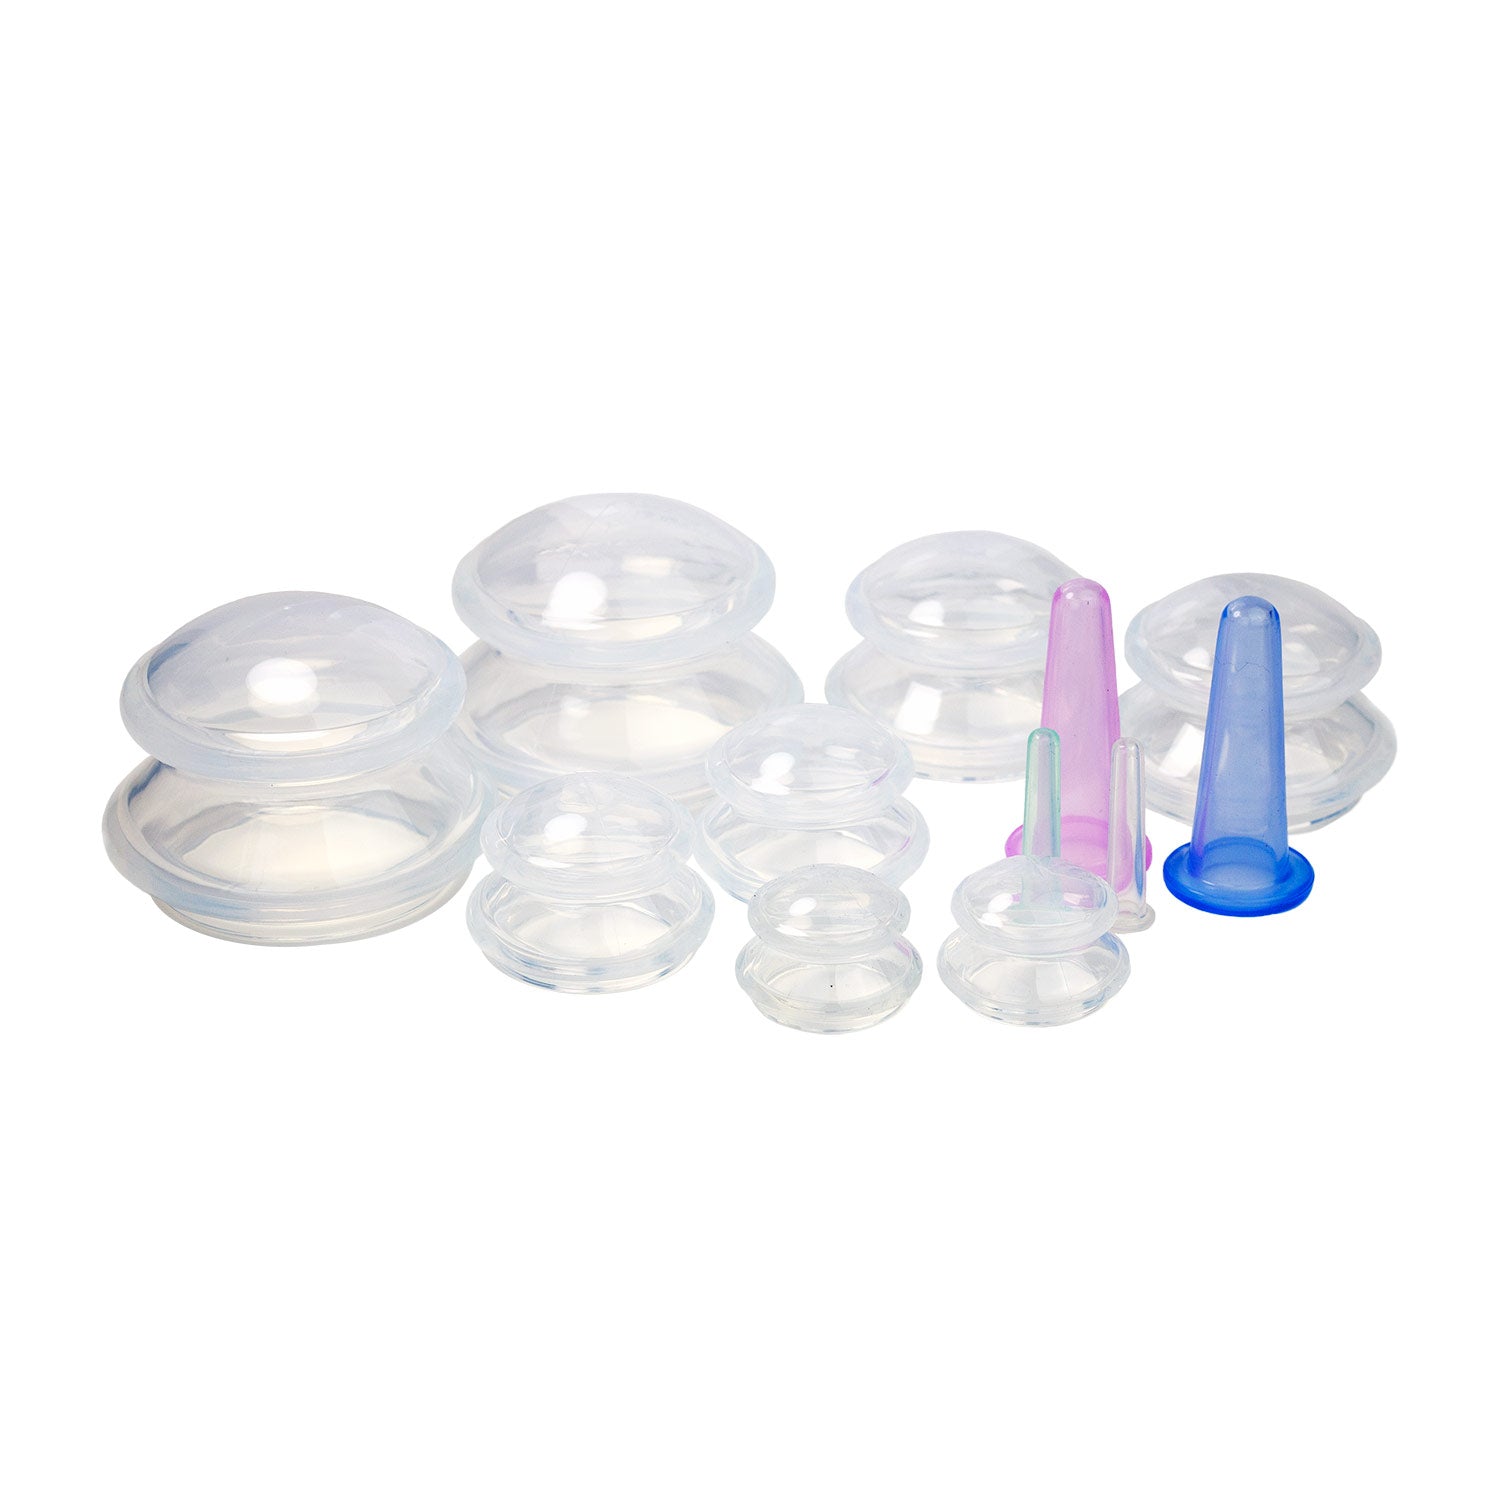 Natural Balance body and face massage silicone cupping set 12pcs